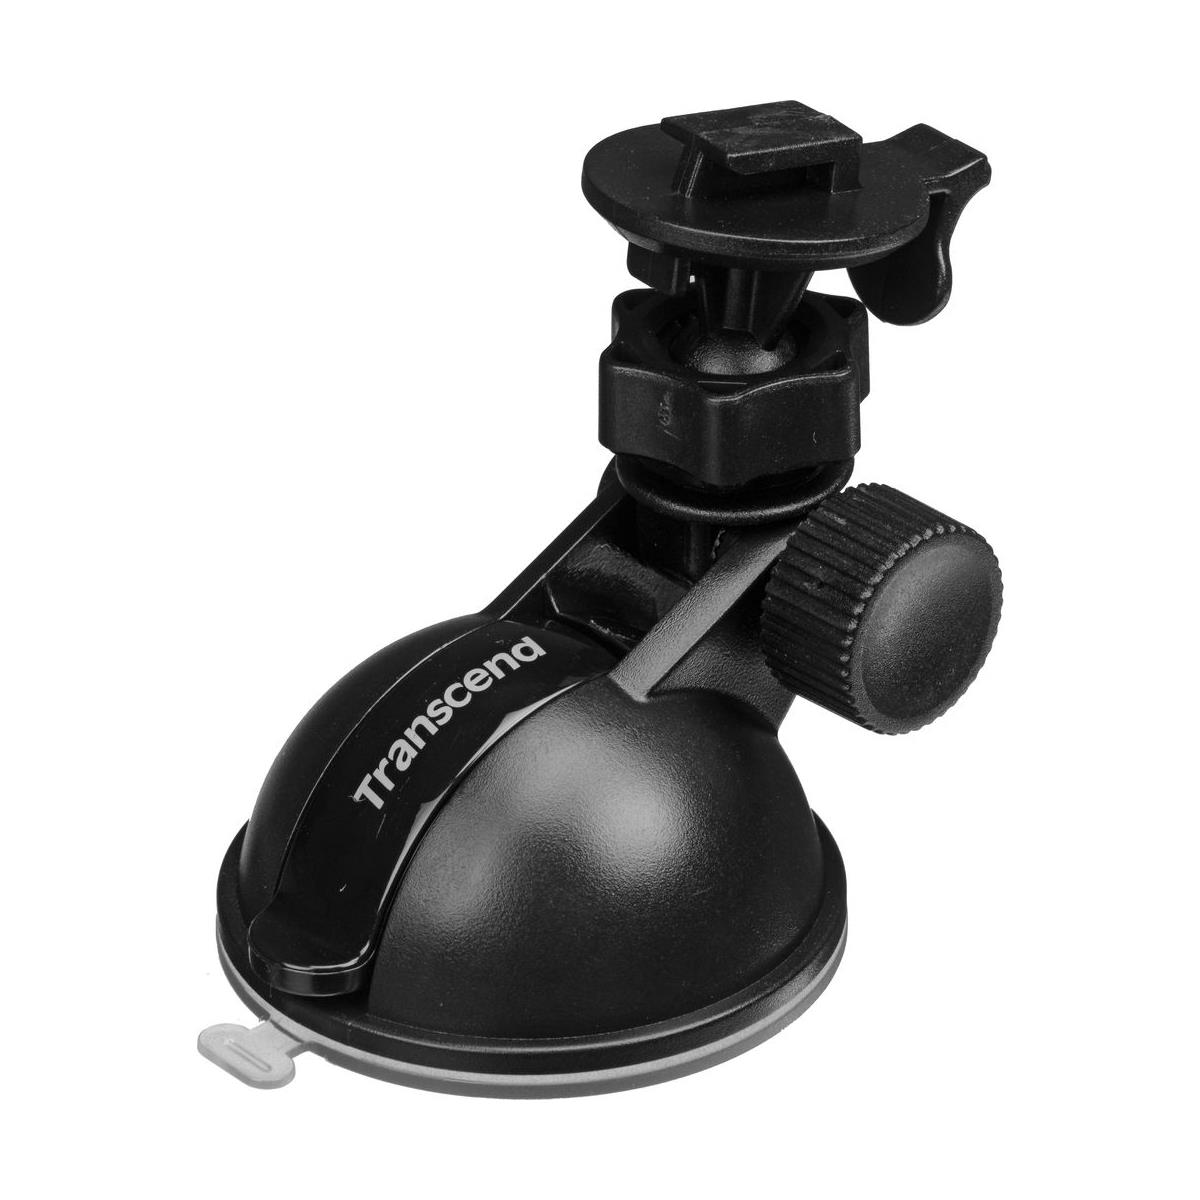 Image of Transcend Suction Mount for Car Video Recorder Series Cameras